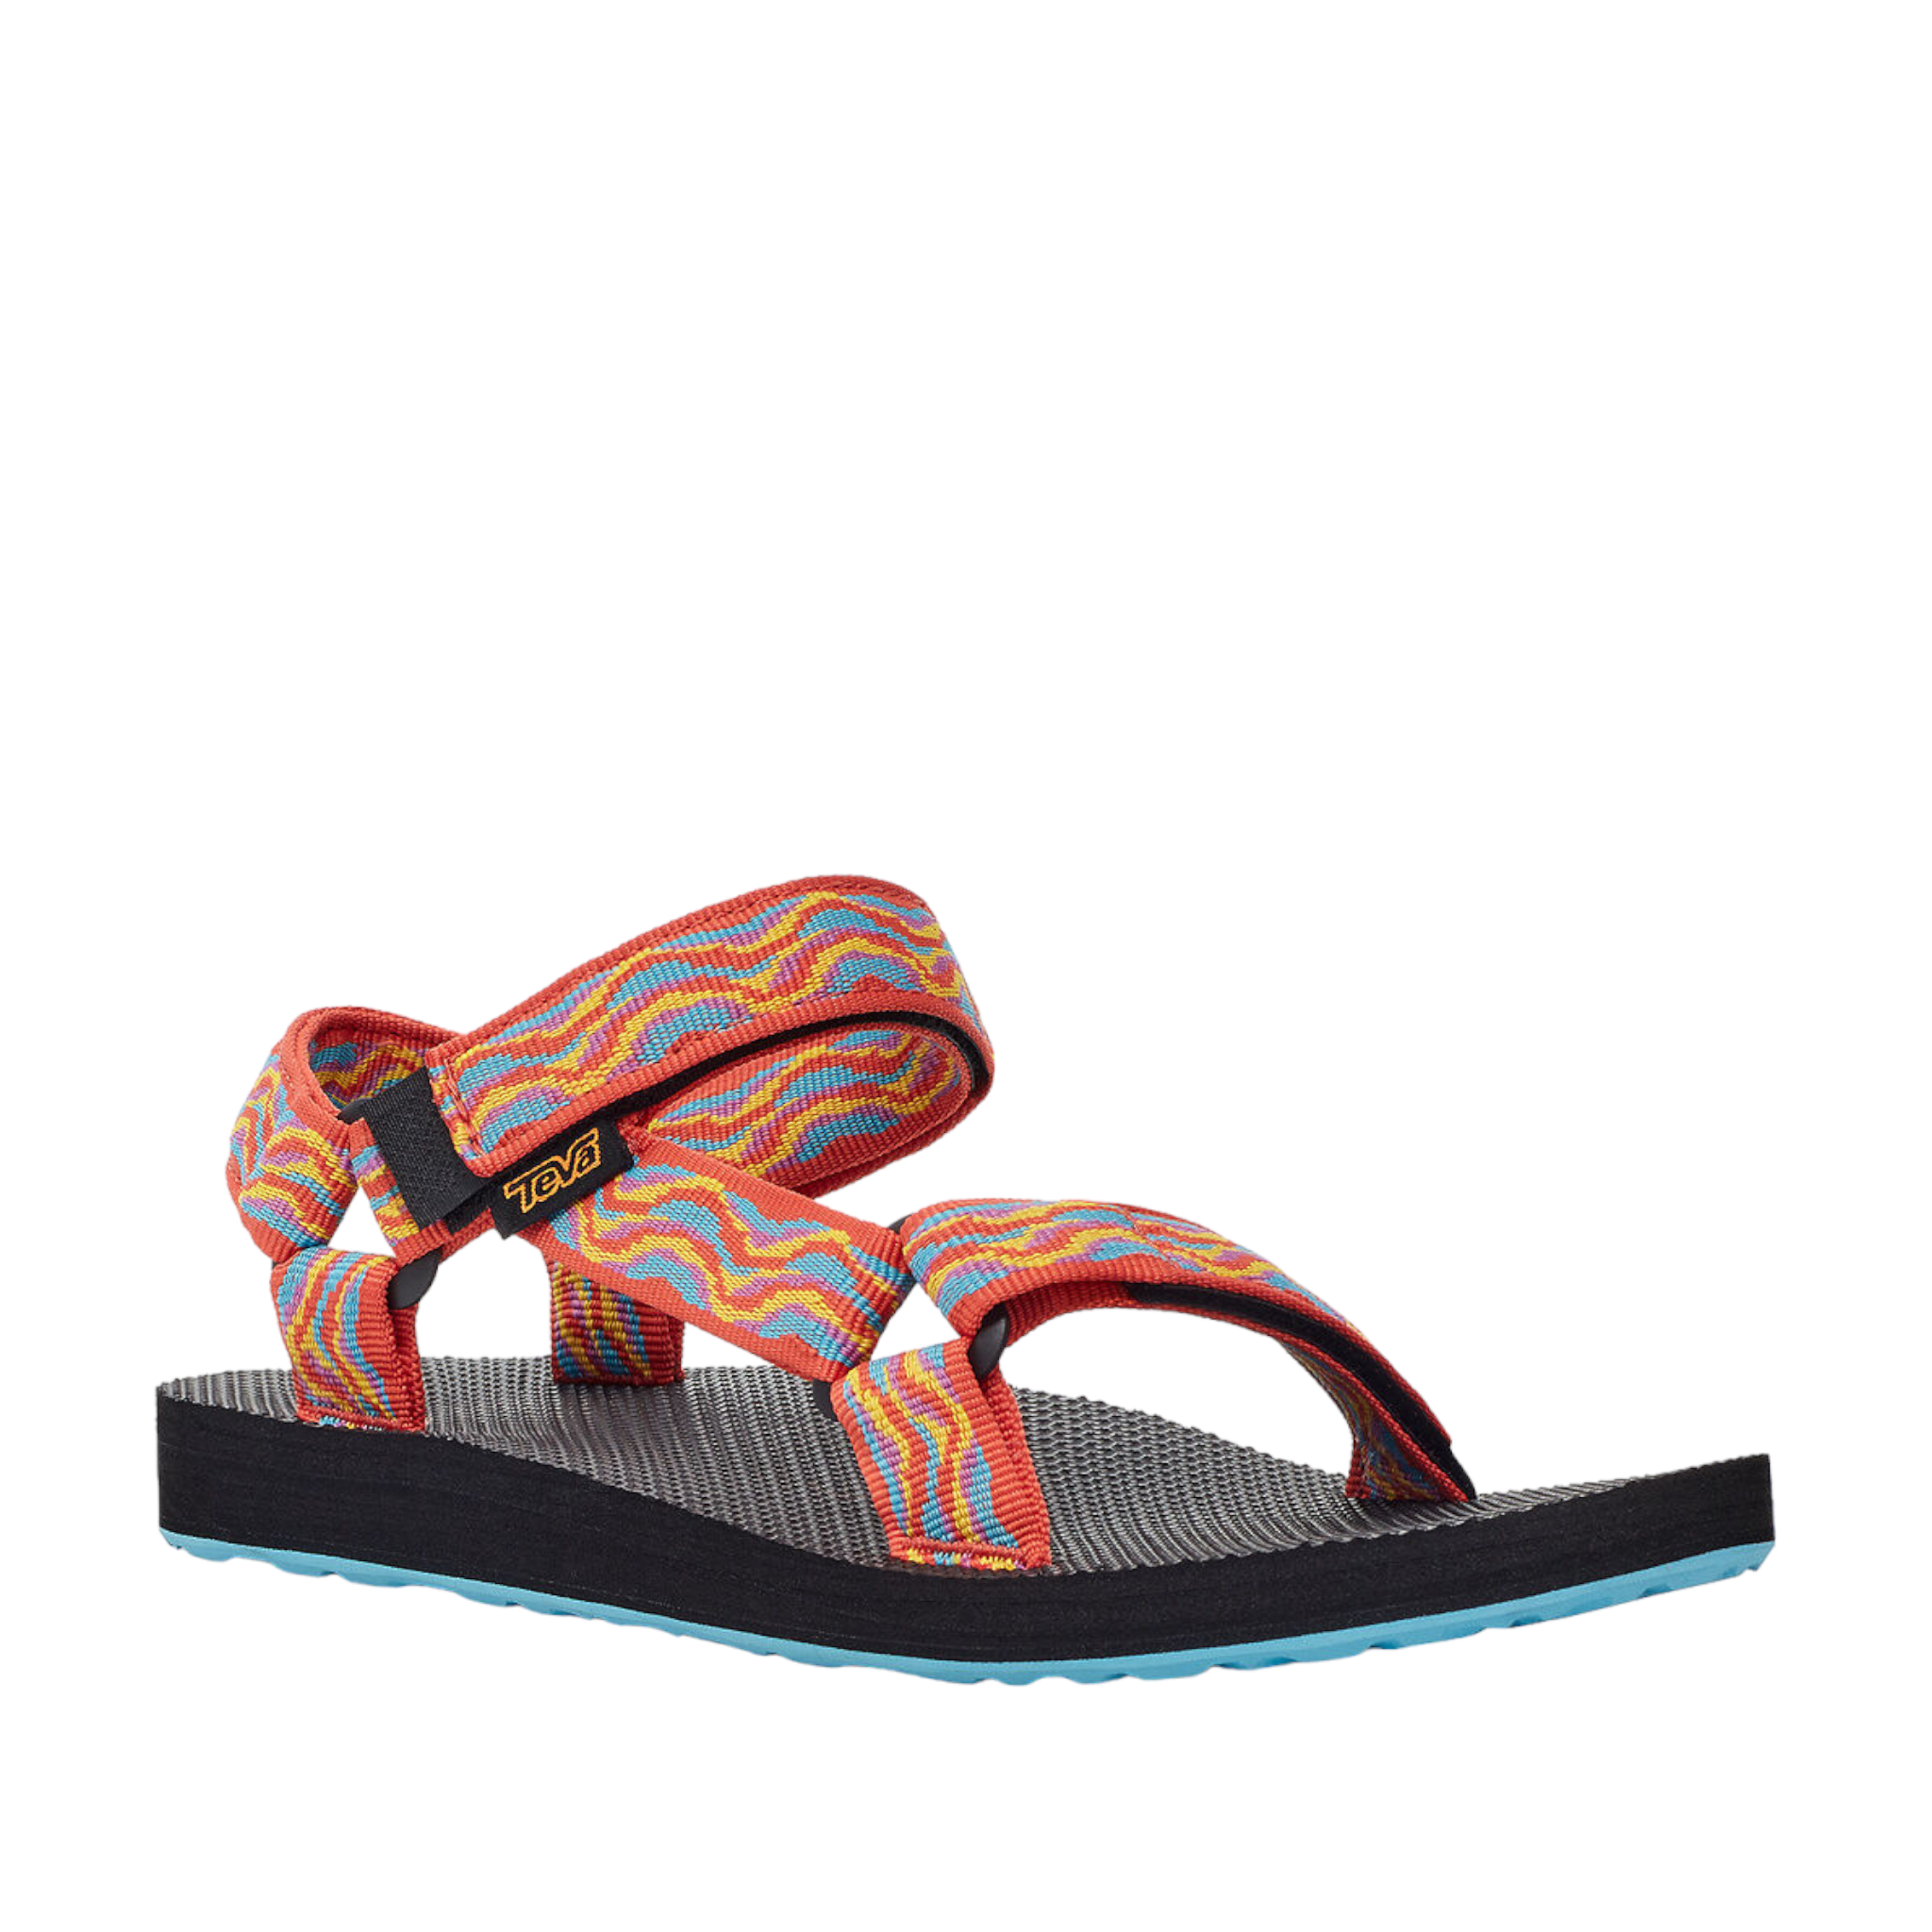 Shop W Original Universal Revive - with shoe&amp;me - from Teva - Sandals - Sandals, Summer, Winter, Womens